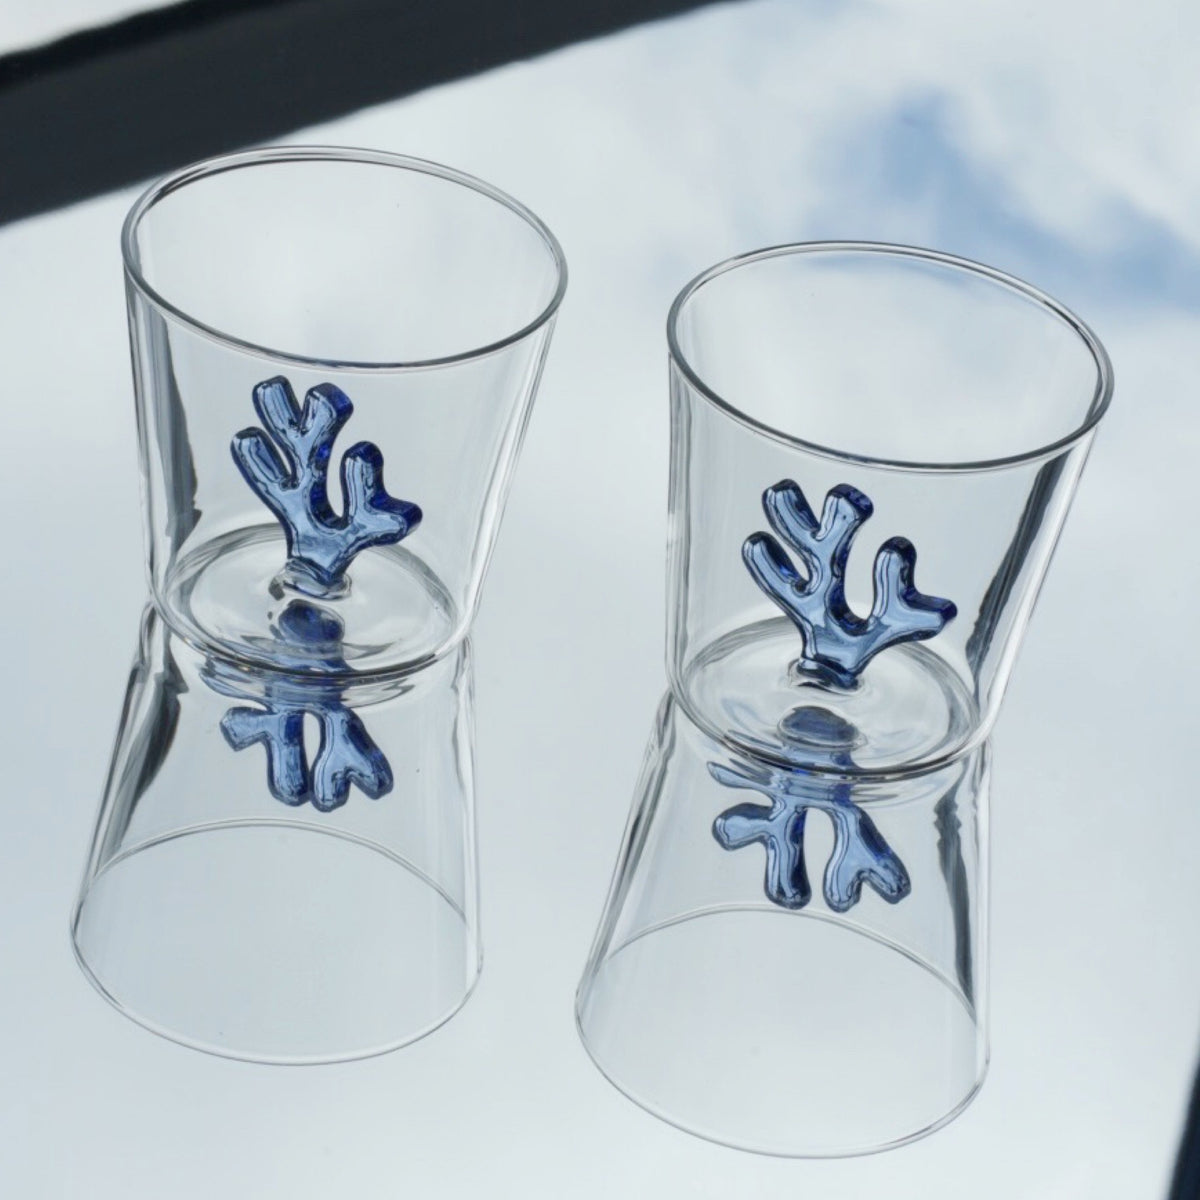 Two Sprezz colored glass drinkware with two blue corals on the inside. A collection of all-purpose clear coloured glassware in cobalt blue